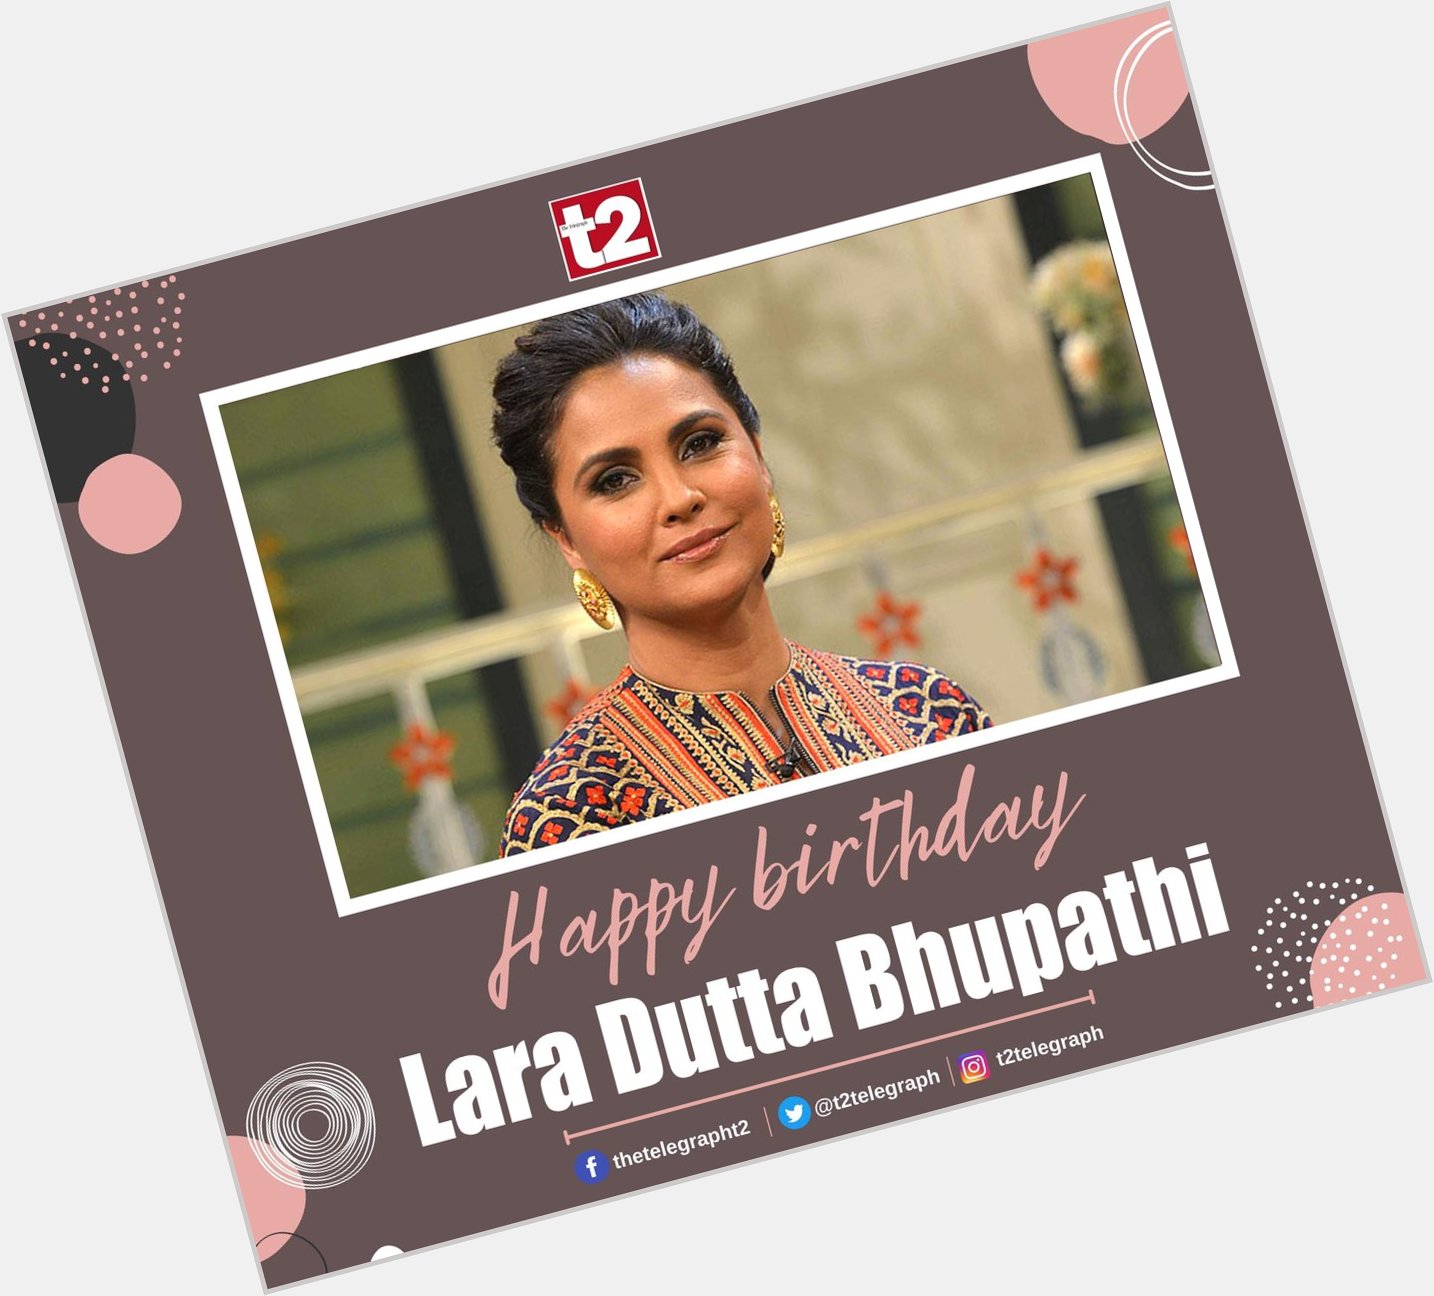 T2 wishes the gorgeous and graceful Lara Dutta Bhupathi a very happy birthday 